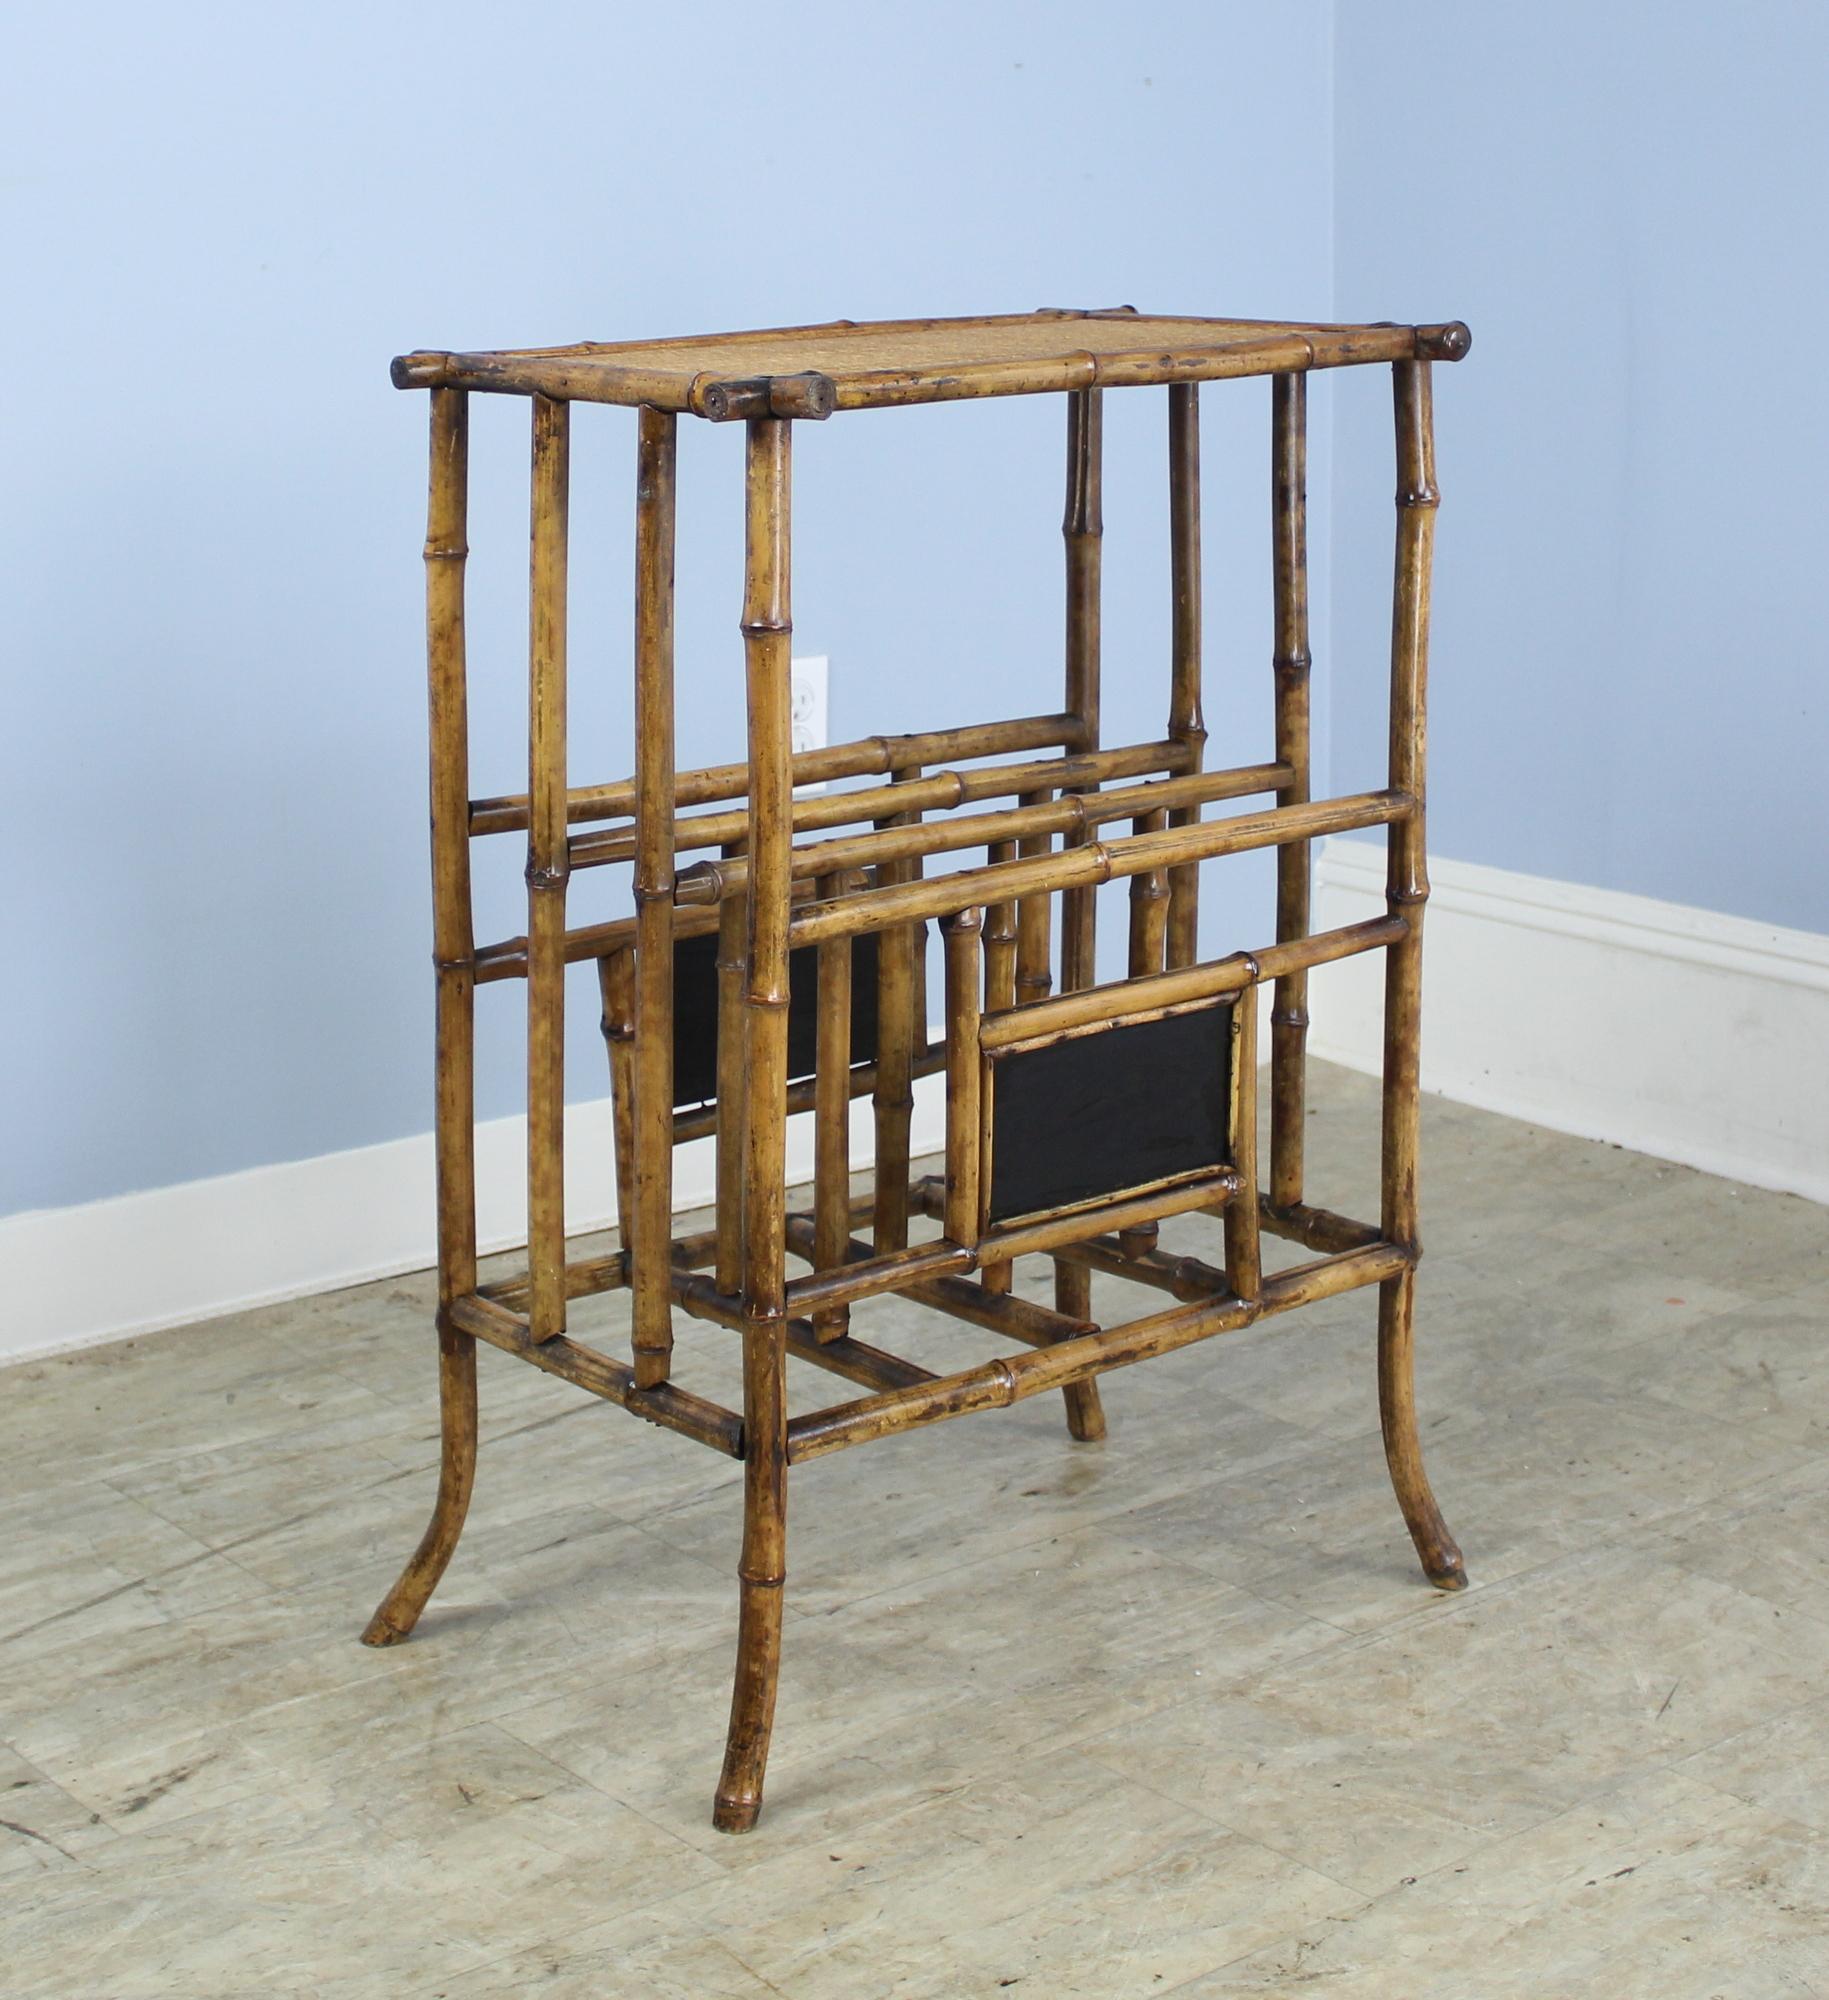 A highly decorative bamboo side or lamp table that is also a useful magazine rack or canterbury, originally designed to hold sheet music. The bamboo is in good antique condition with vibrant color and the rattan top is also in good condition. One